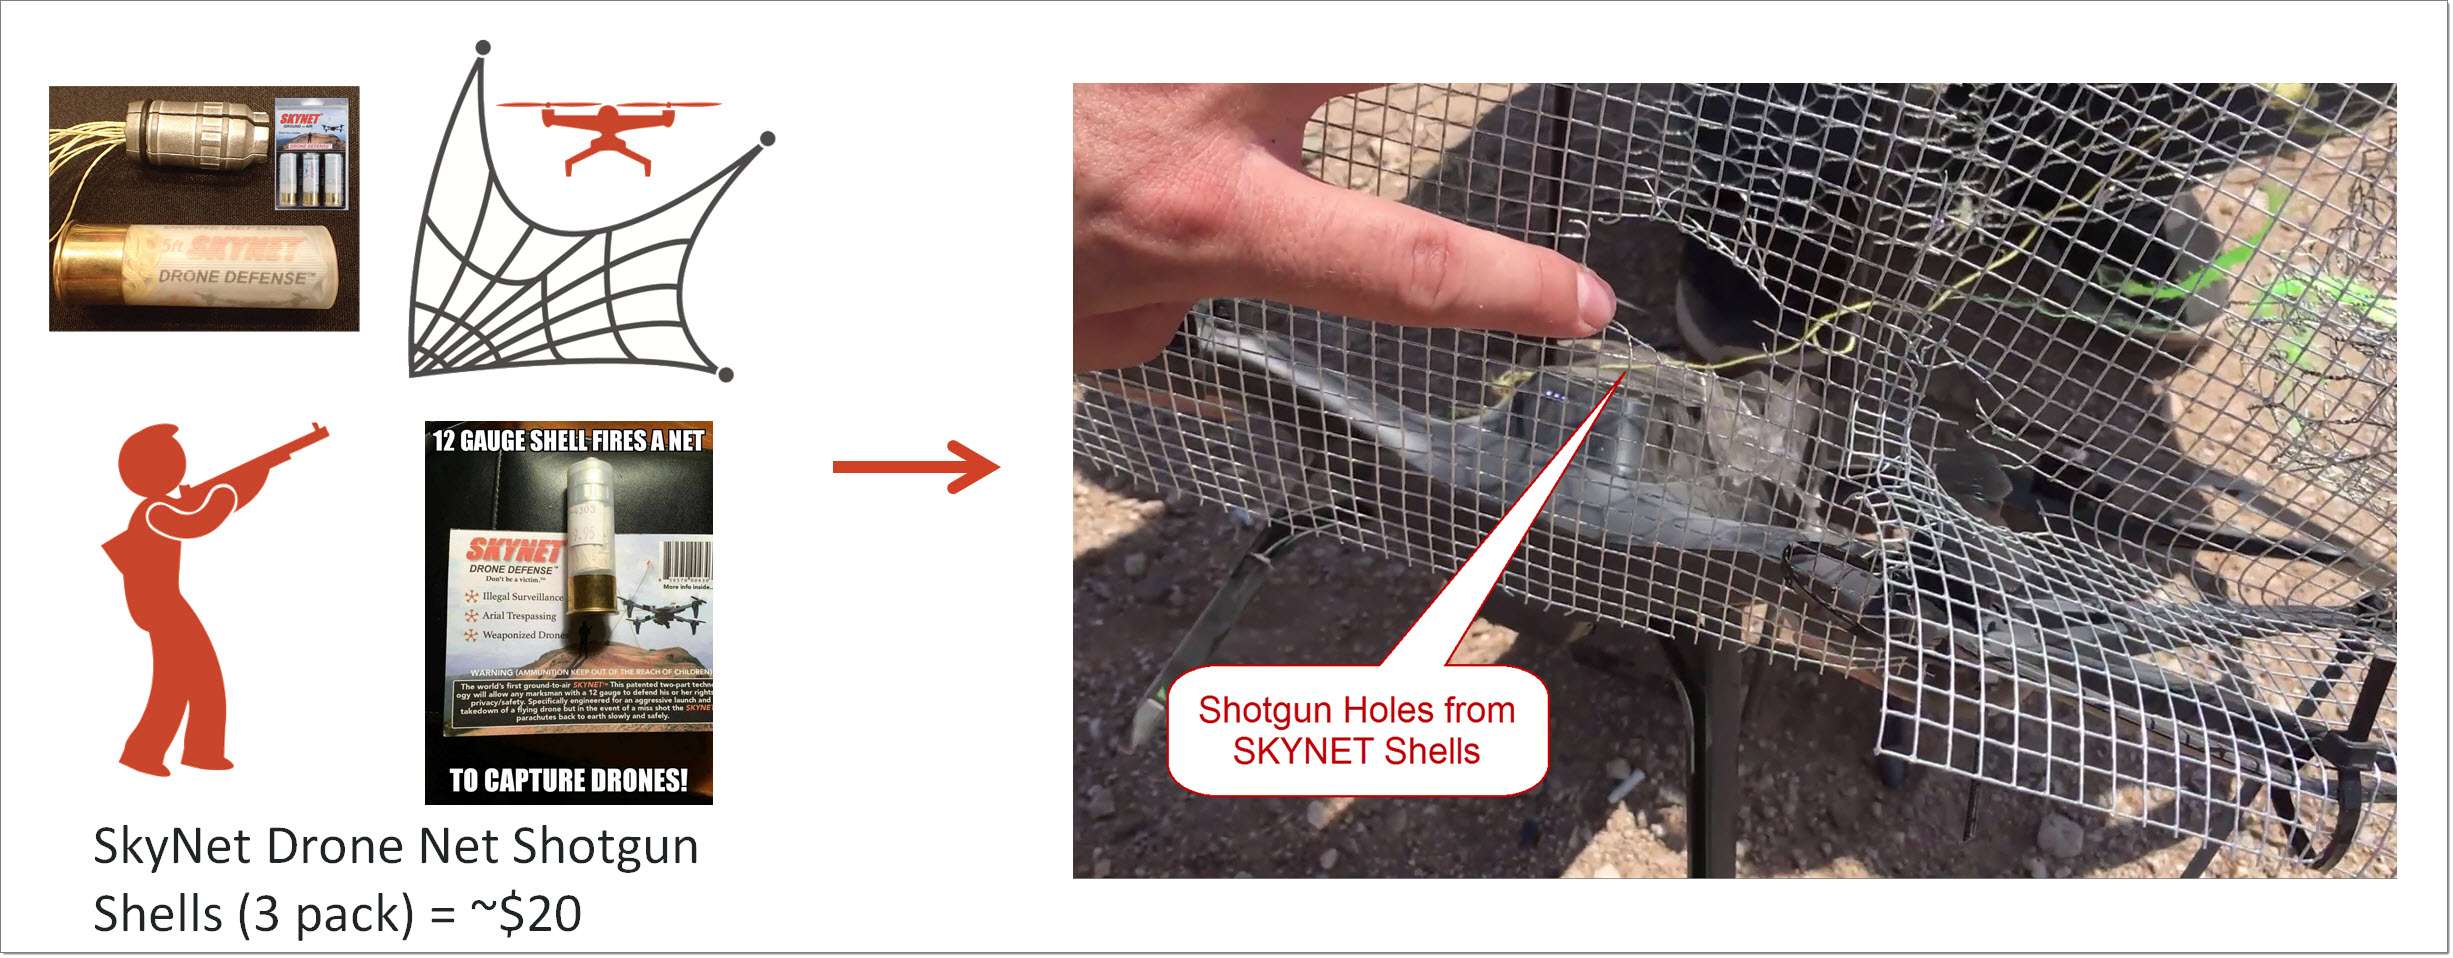 Breaking Drone Defenses: Using Chicken Wire to Defeat…